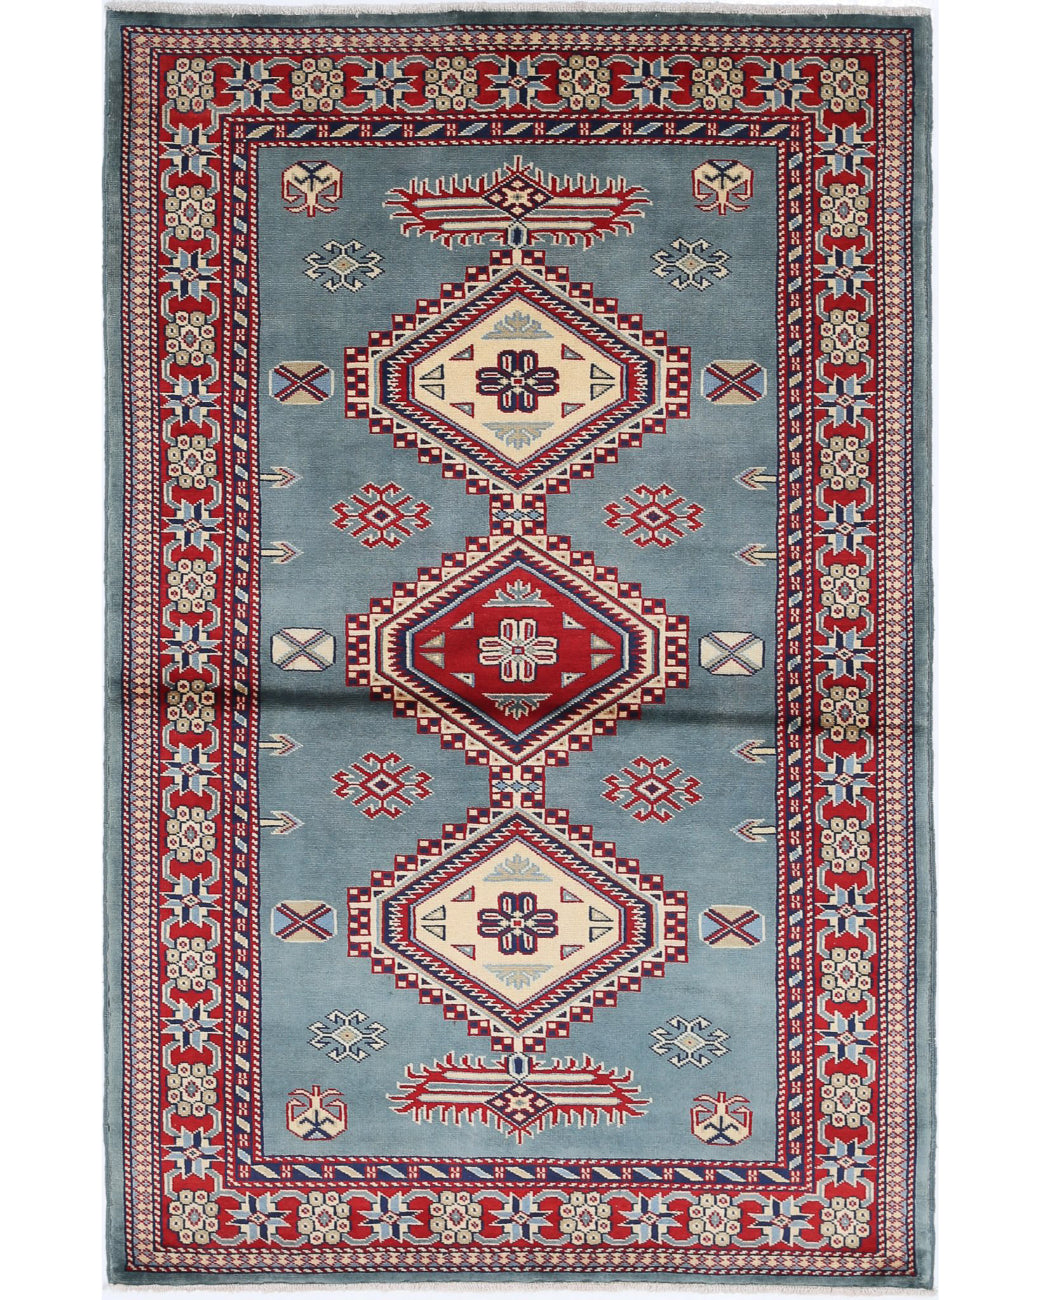 Shirvan 3'4'' X 4'10'' Hand-Knotted Wool Rug 3'4'' x 4'10'' (100 X 145) / Blue / Red